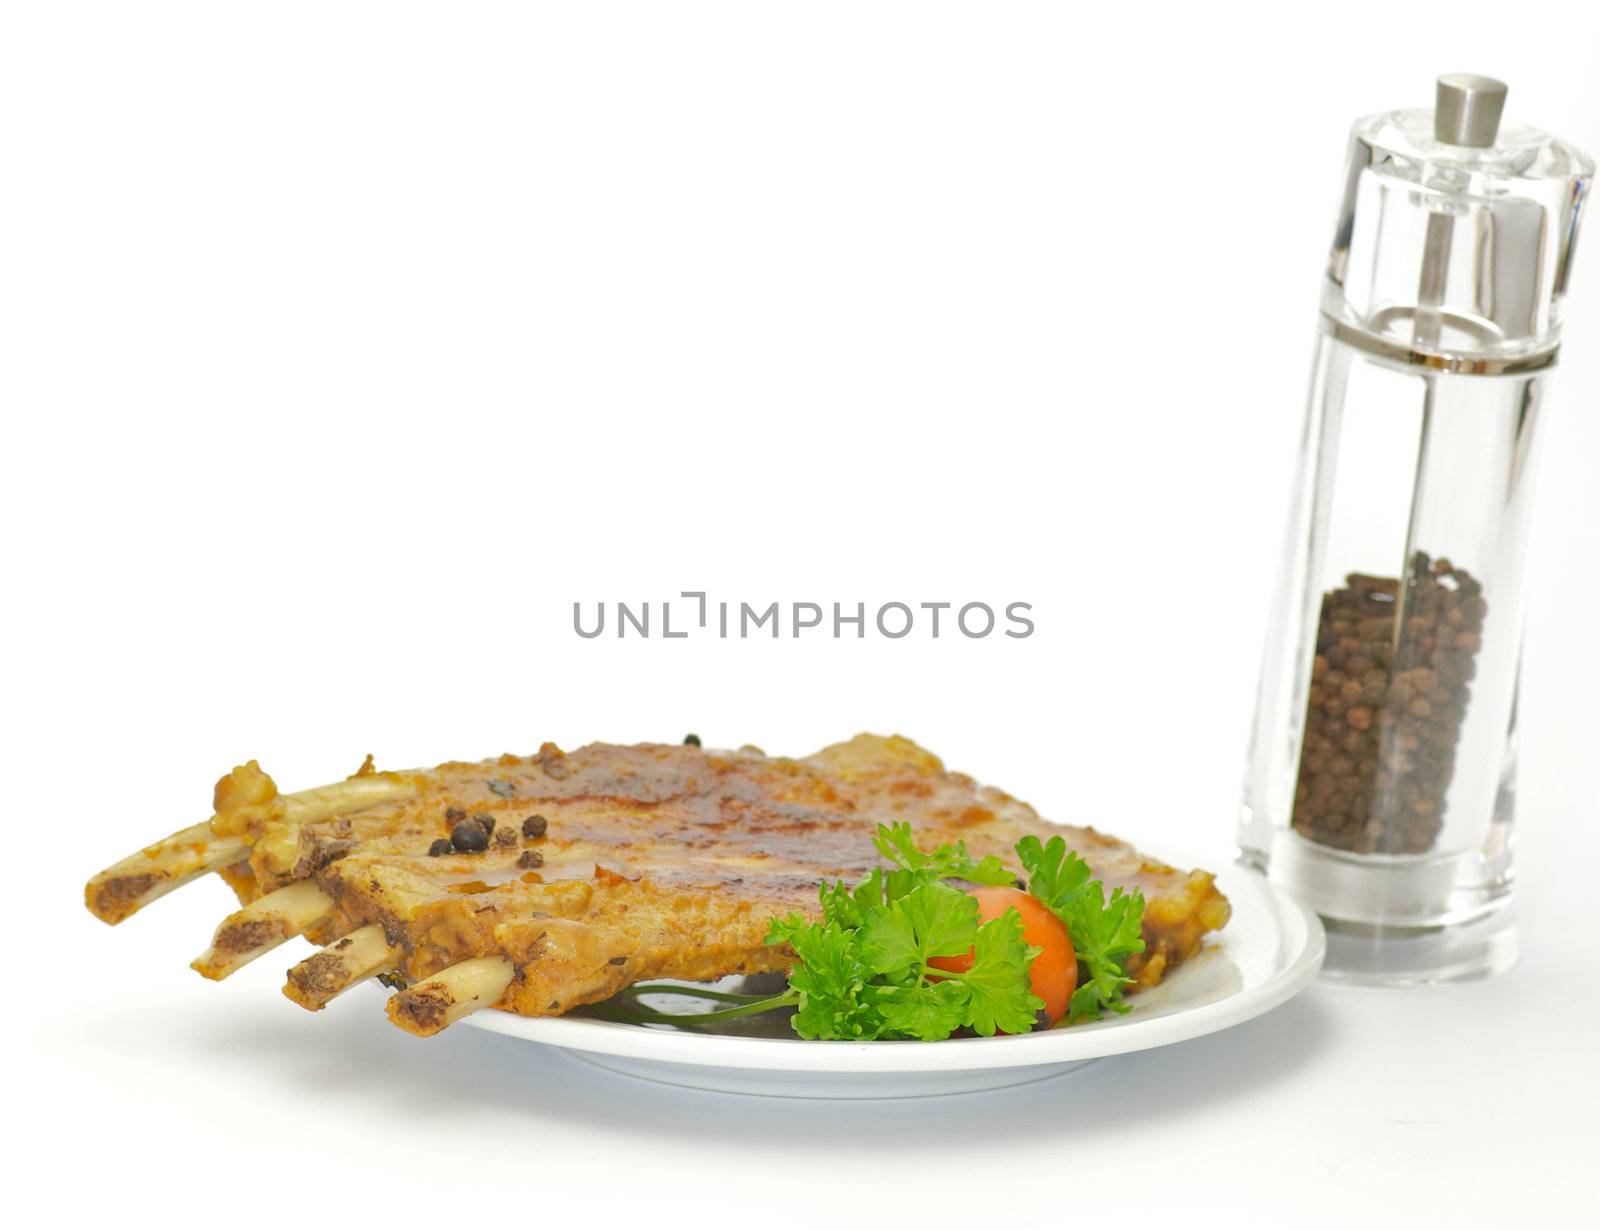 Barbecued pork ribs on white plate by zhekos